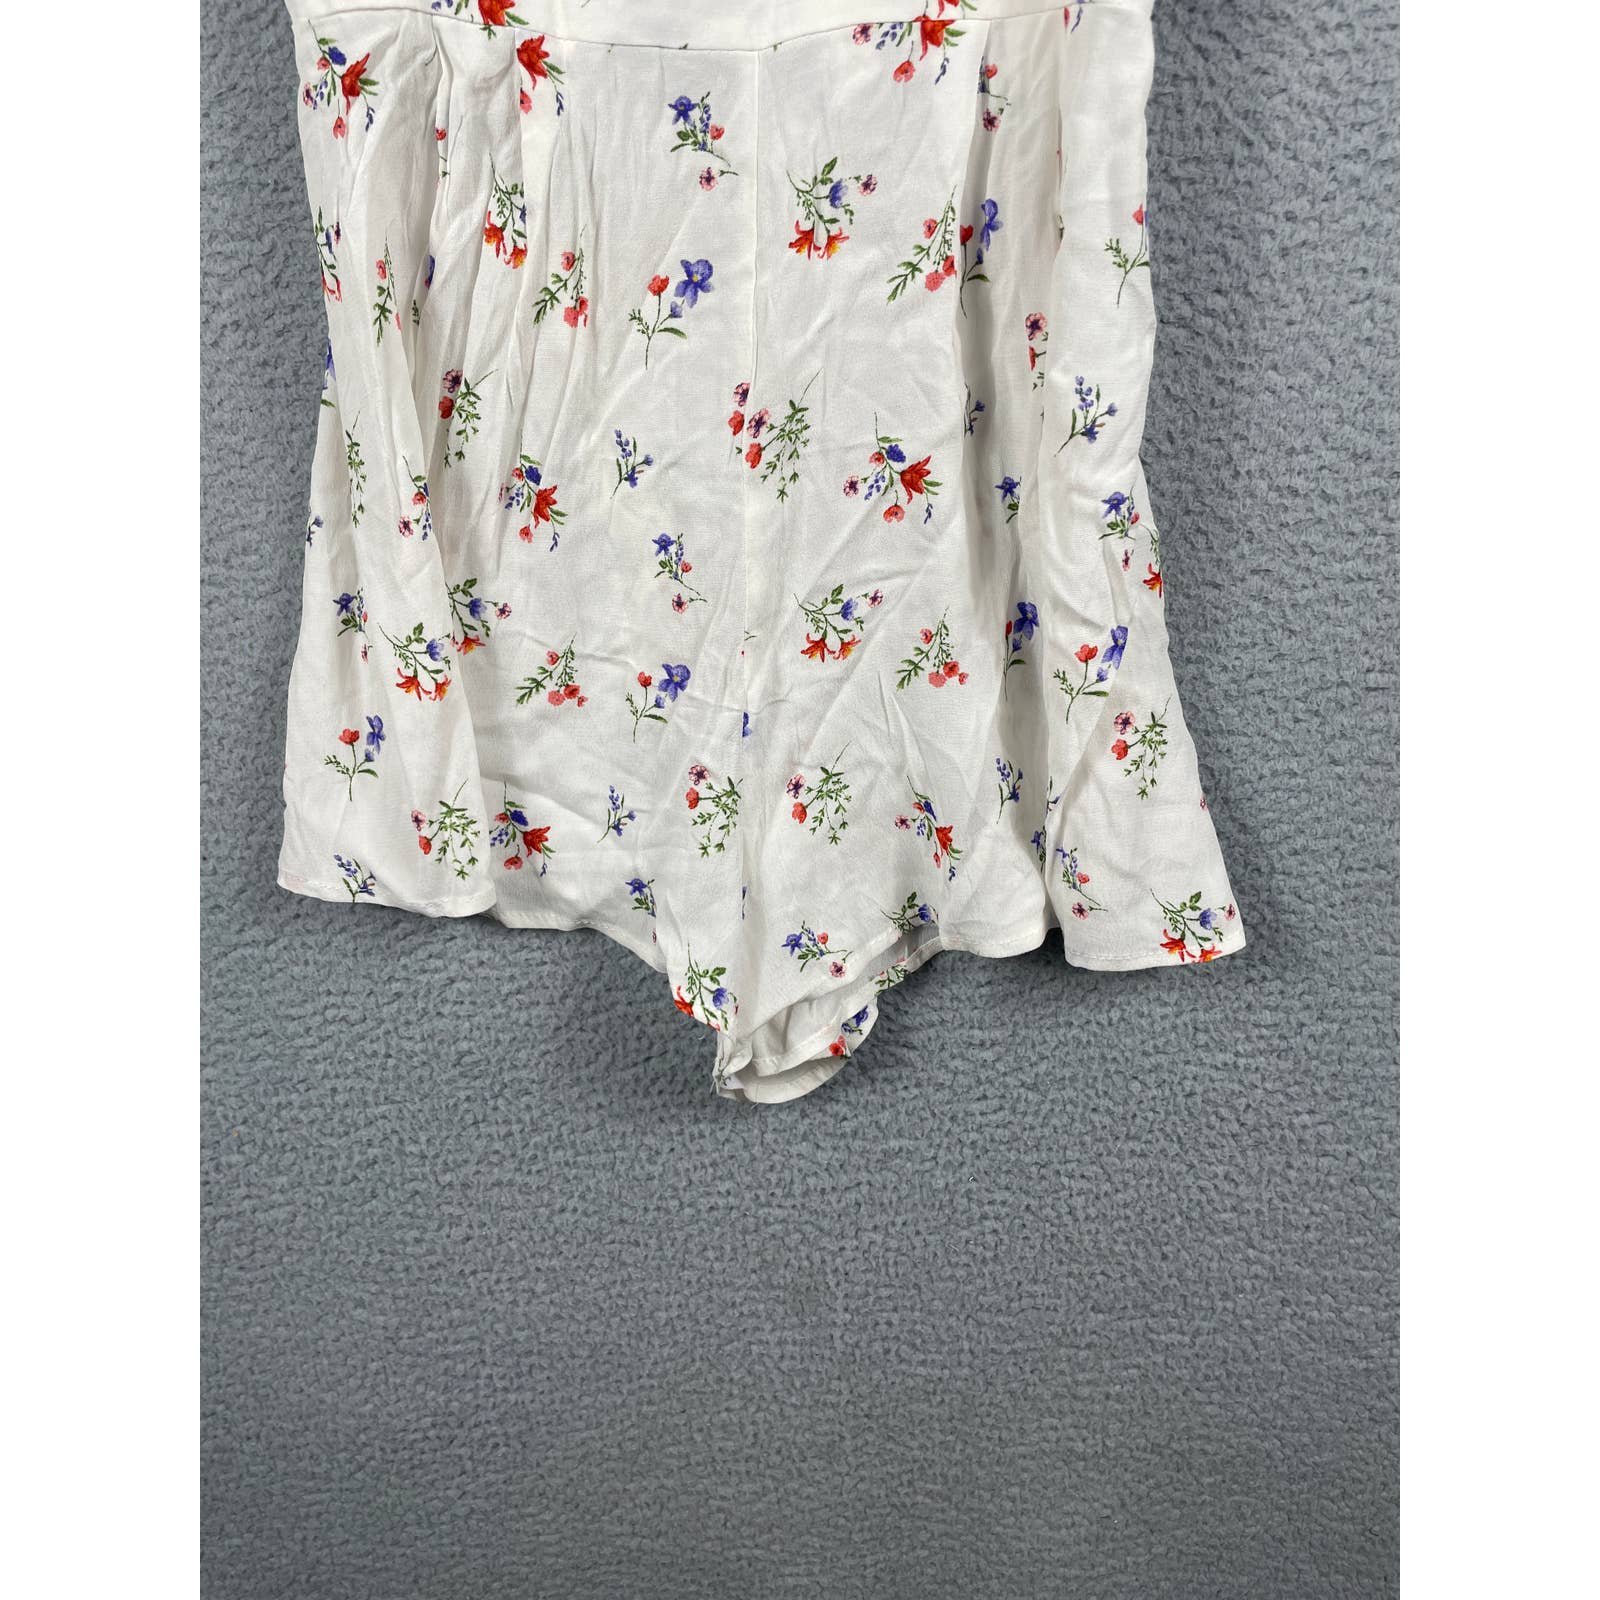 save up to 70% Forever 21 Women´s Romper White with Floral Print Size L IHkhE22eA on sale